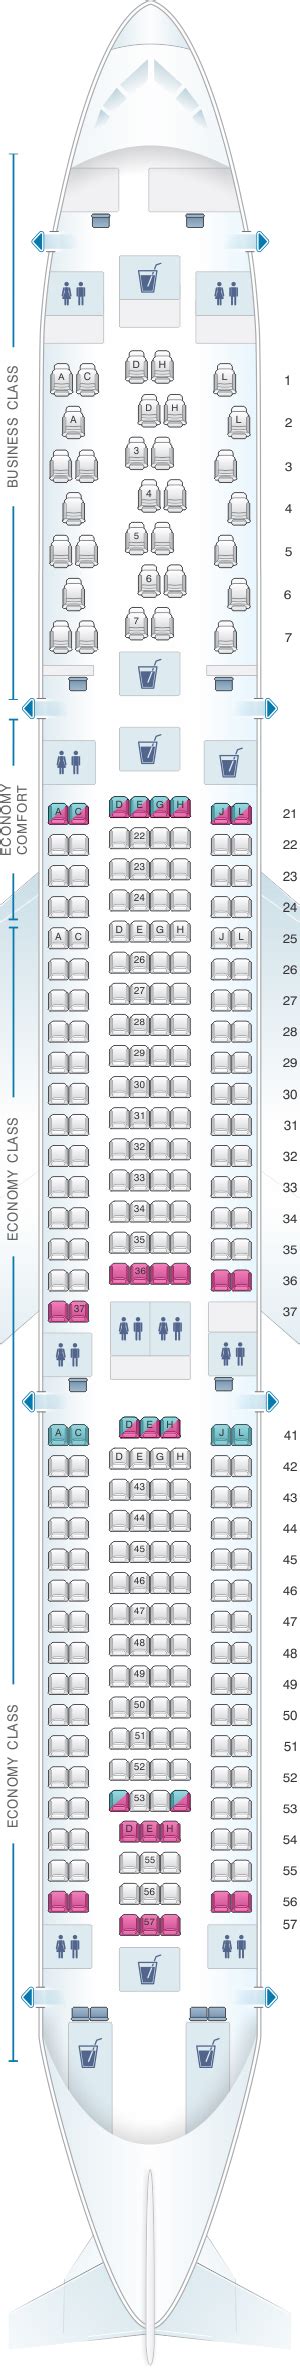 Airbus A330 300 Seating - change comin